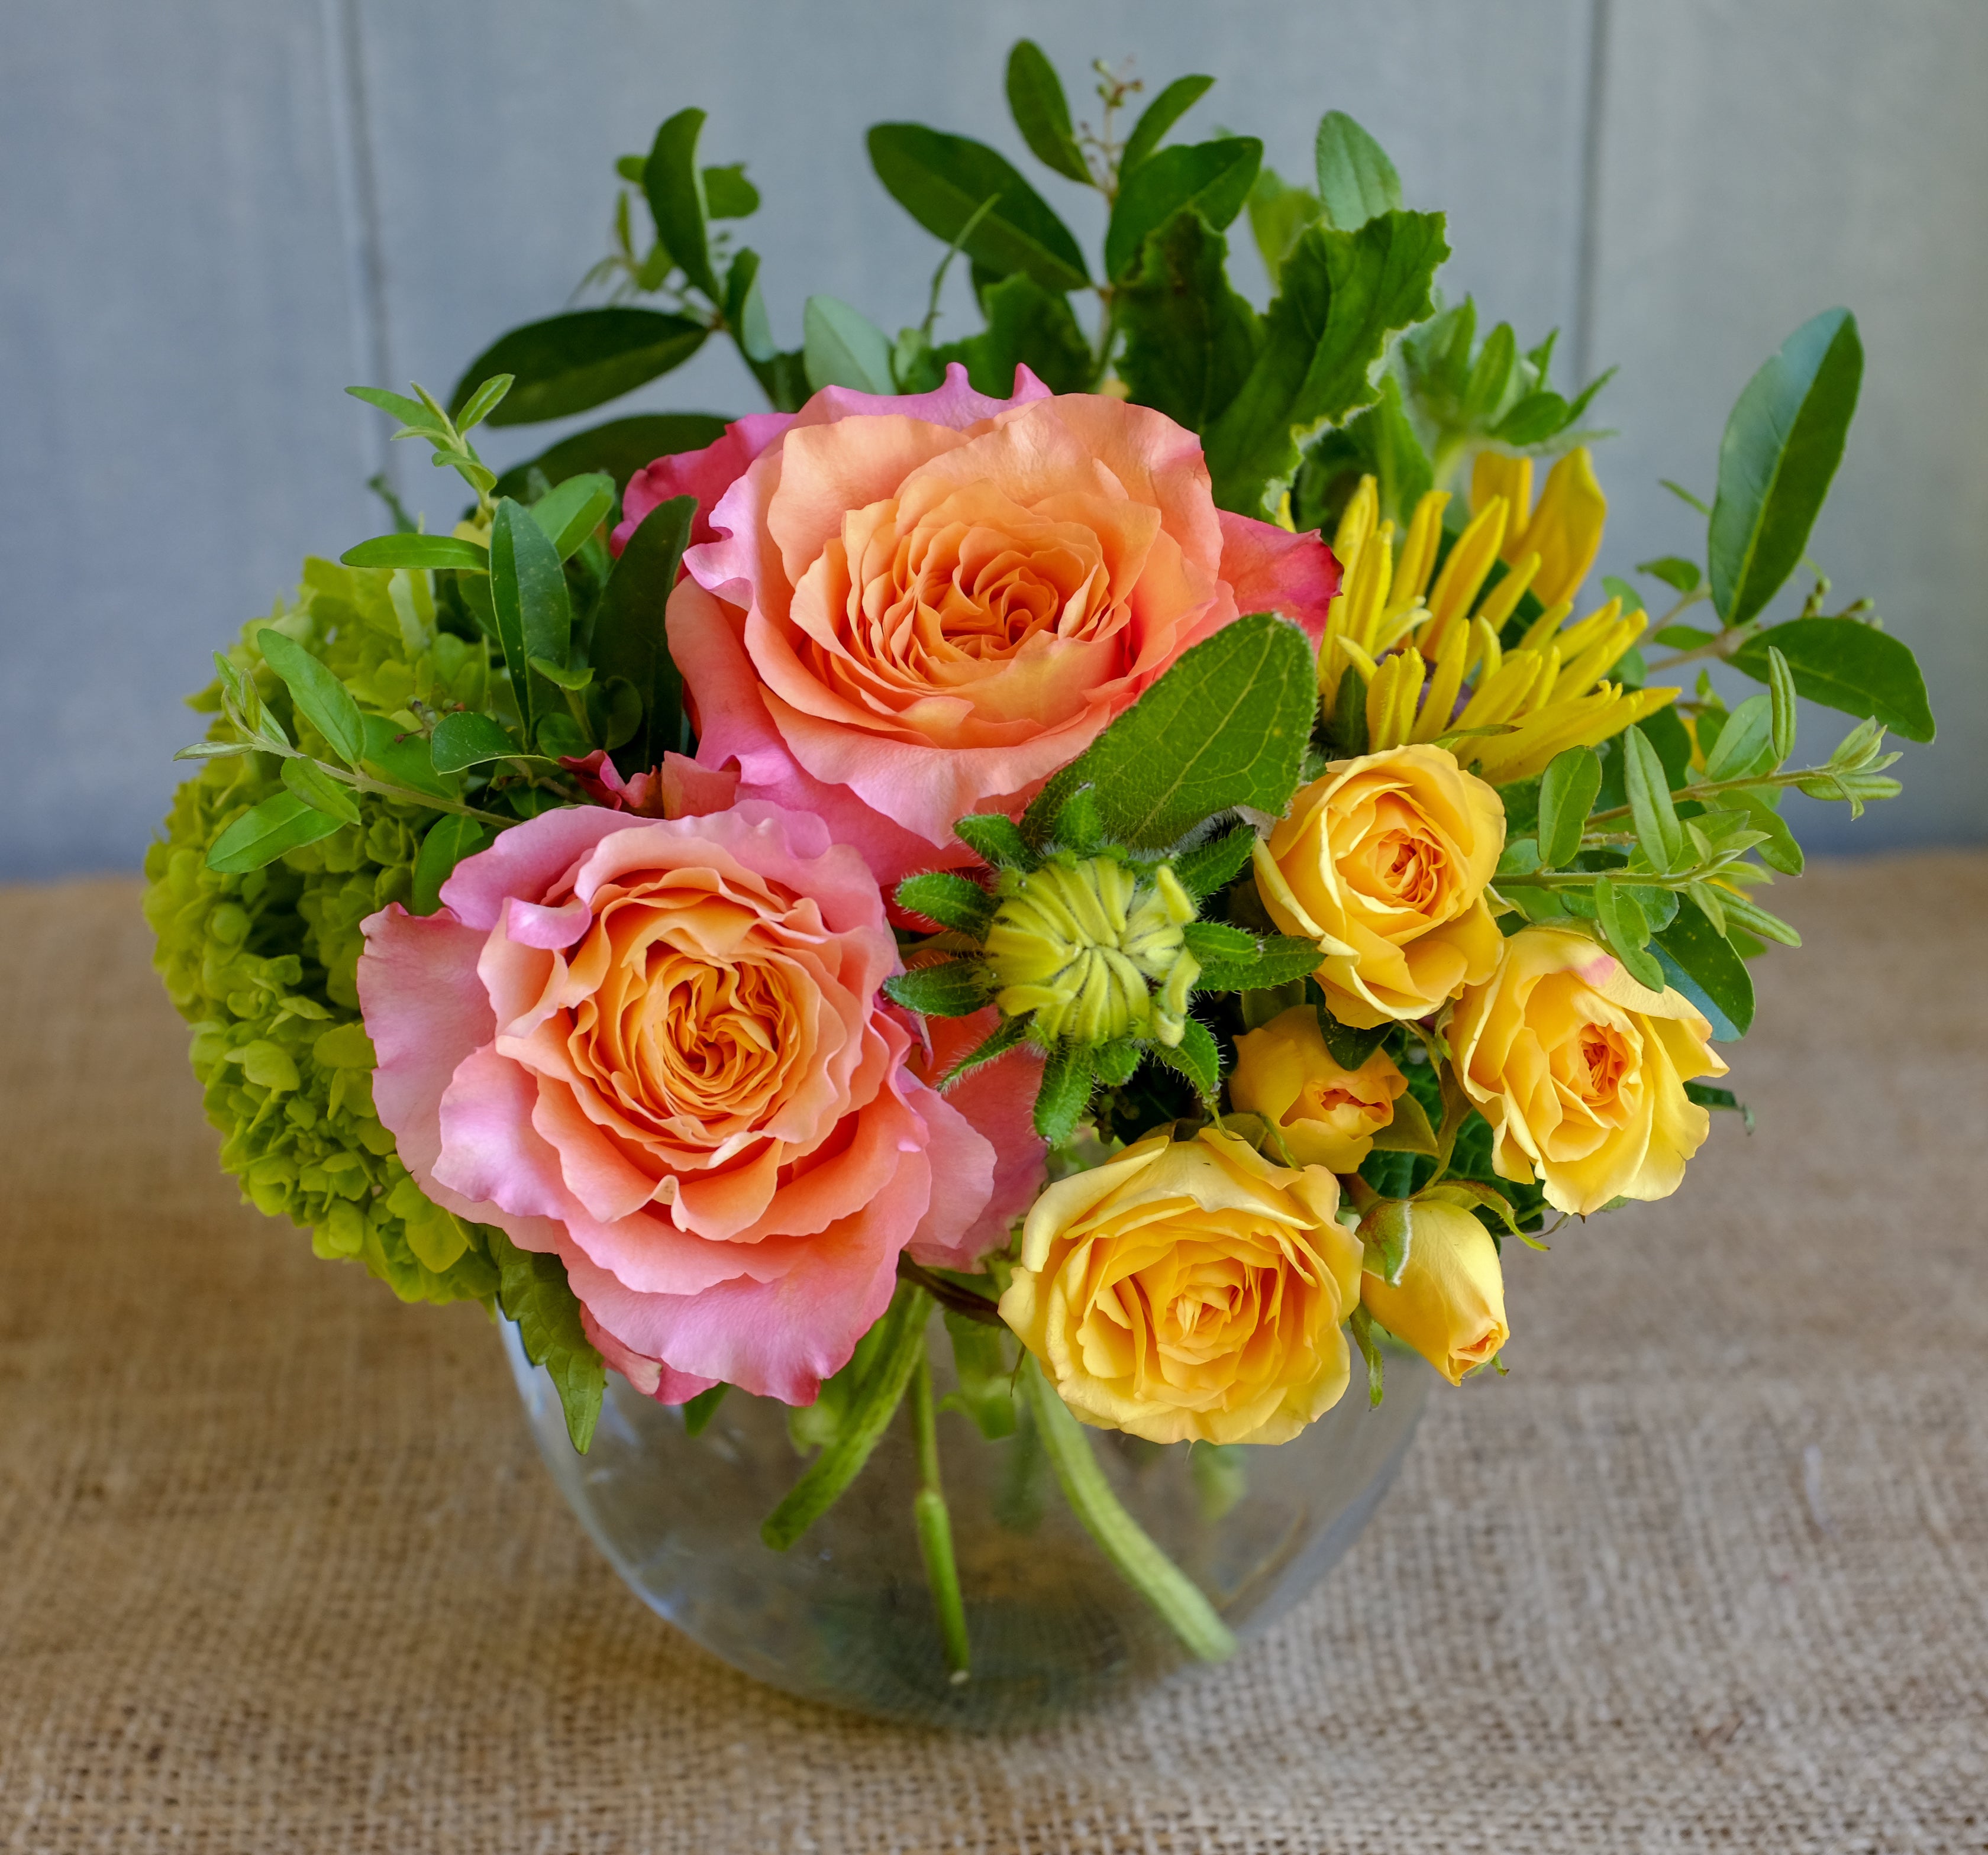 Cheerful low and lush bouquet with orange and yellow roses designed in bubble bowl